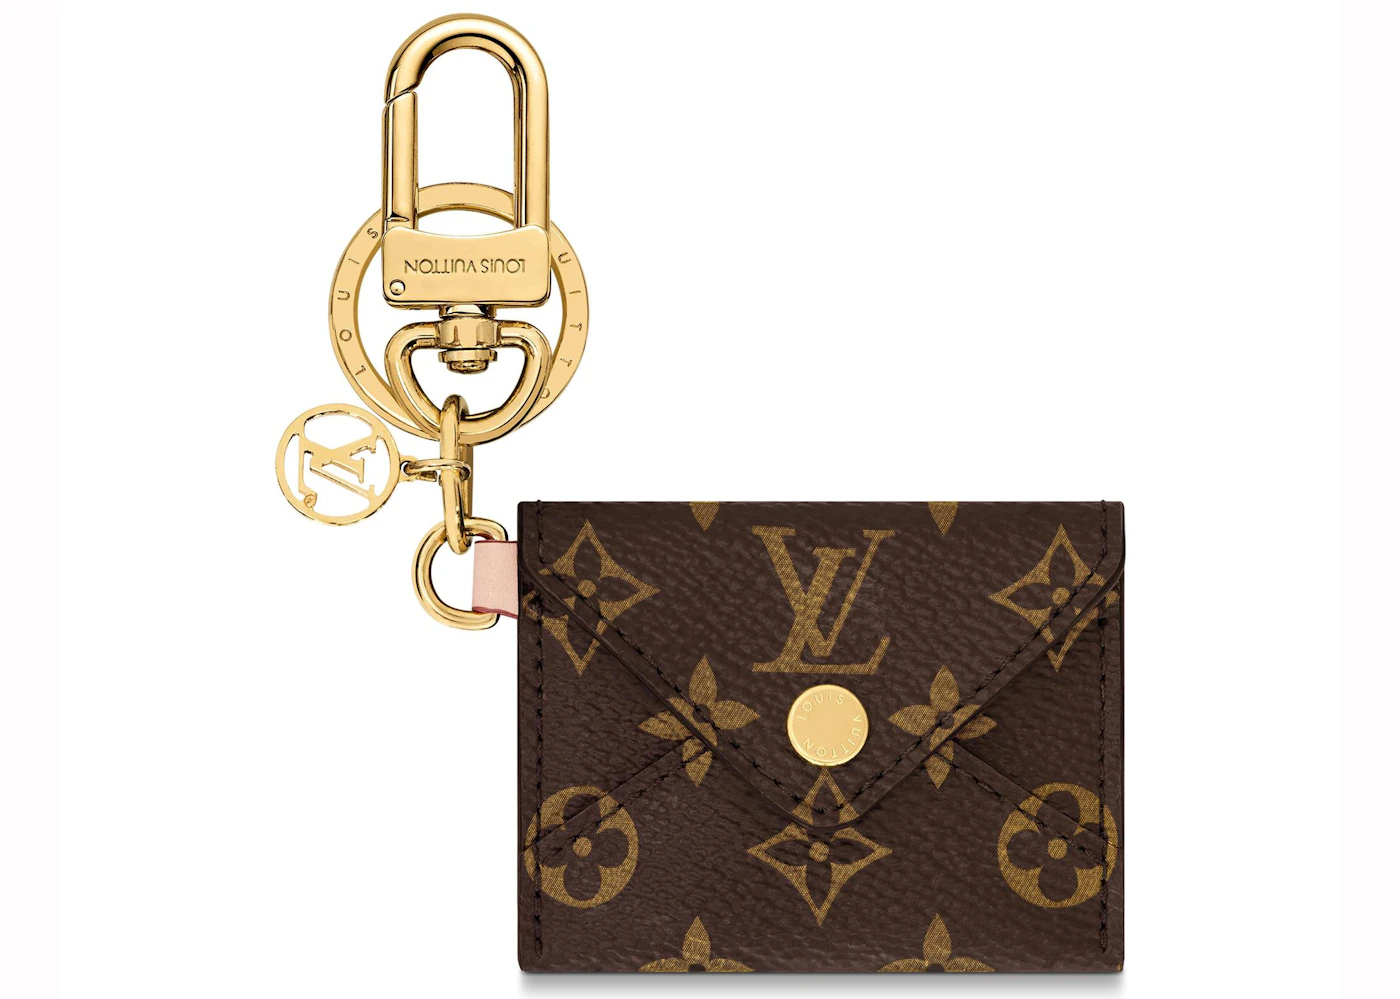 Louis Vuitton Monogram Animal Faces Bag Charm and Key Holder - Brown  Keychains, Accessories - LOU787256